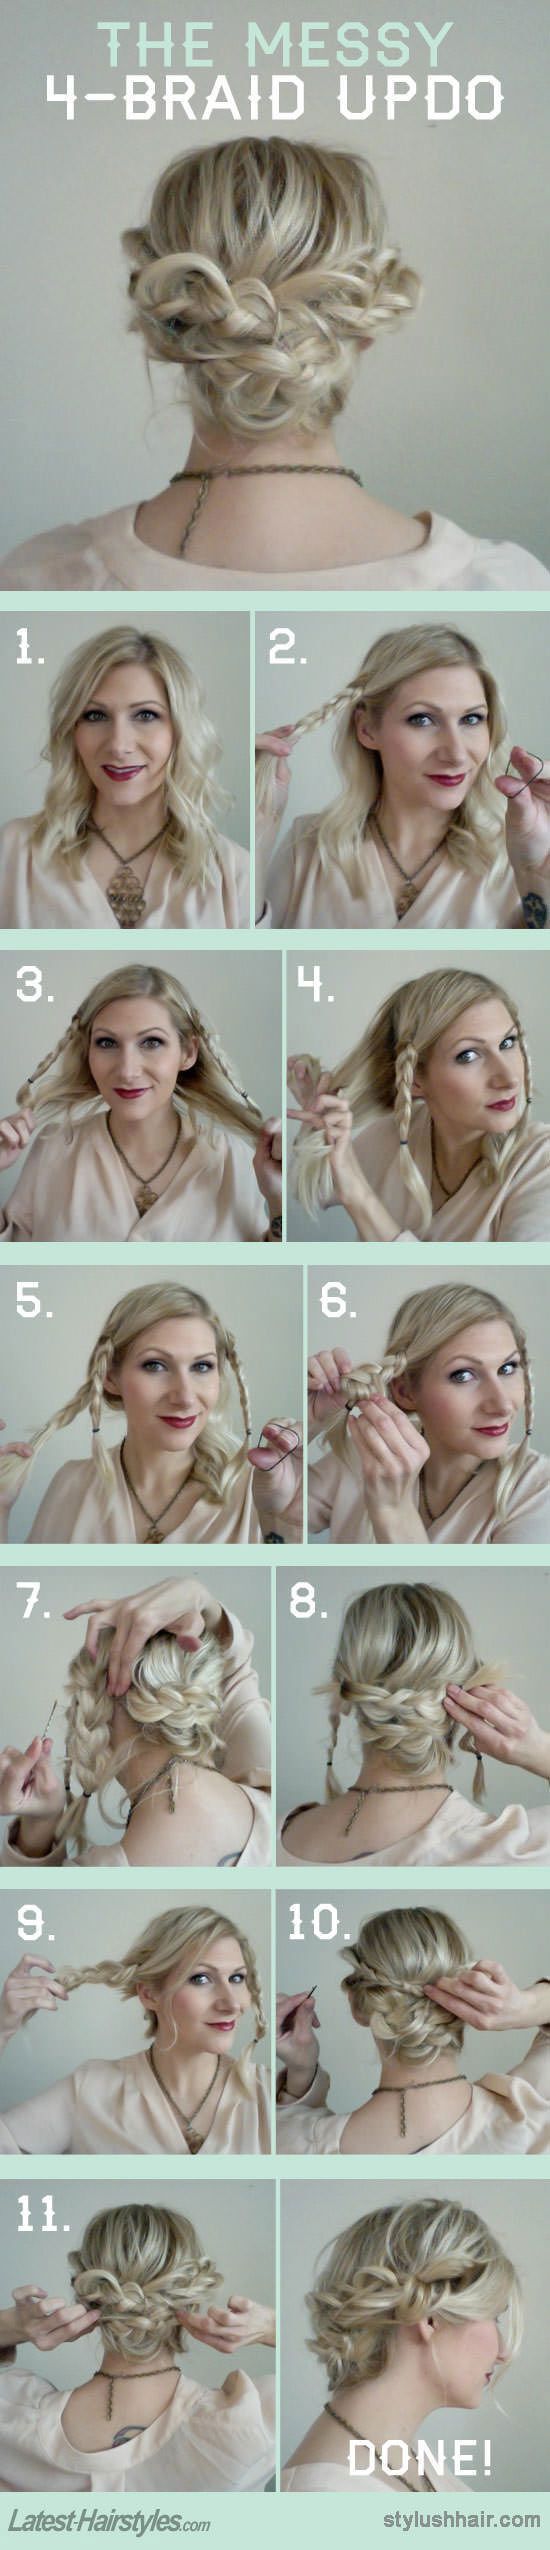 Cute and Easy Updo Hairstyle Tutorial - Messy Braid Updos